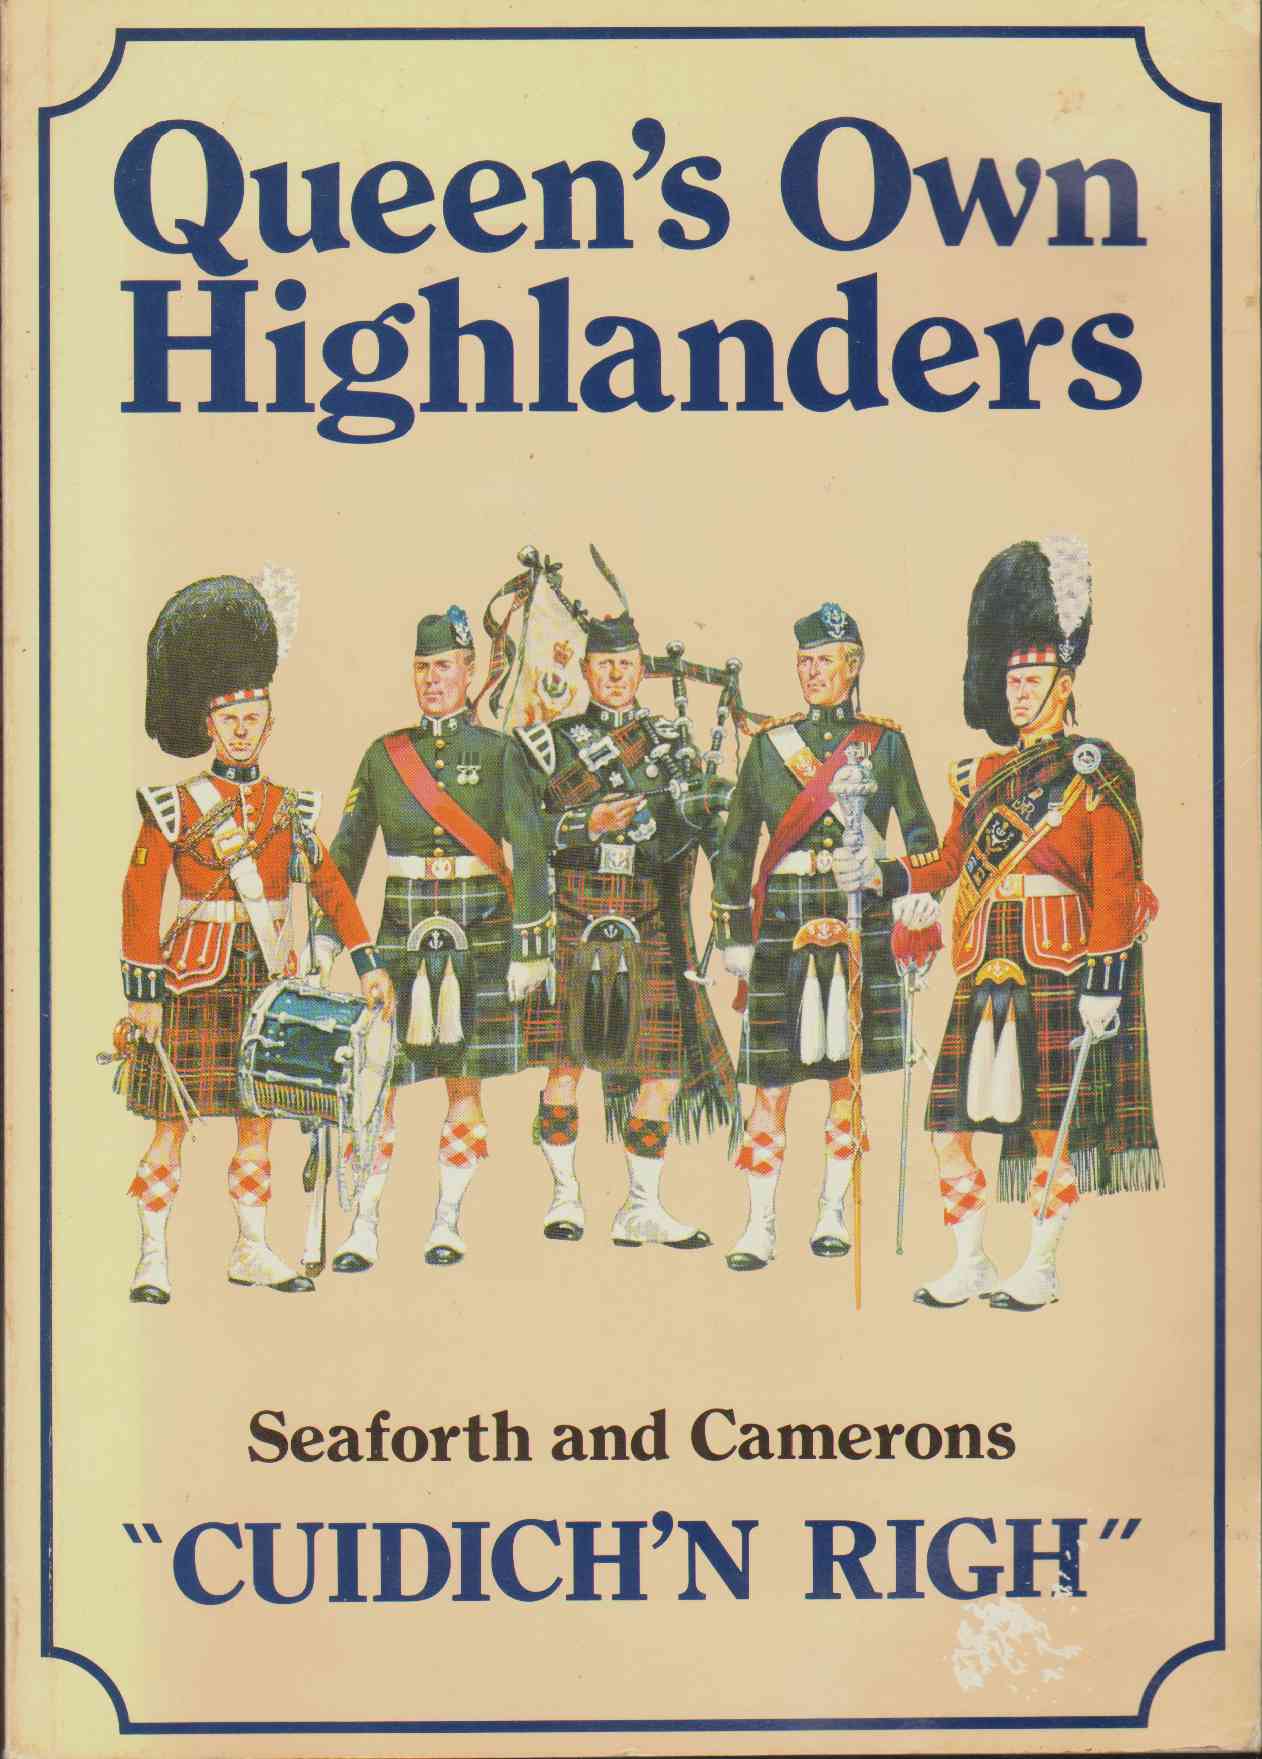 Image for CUIDICH N RIGH Queens Own Highlanders, Seaforth and Camerons